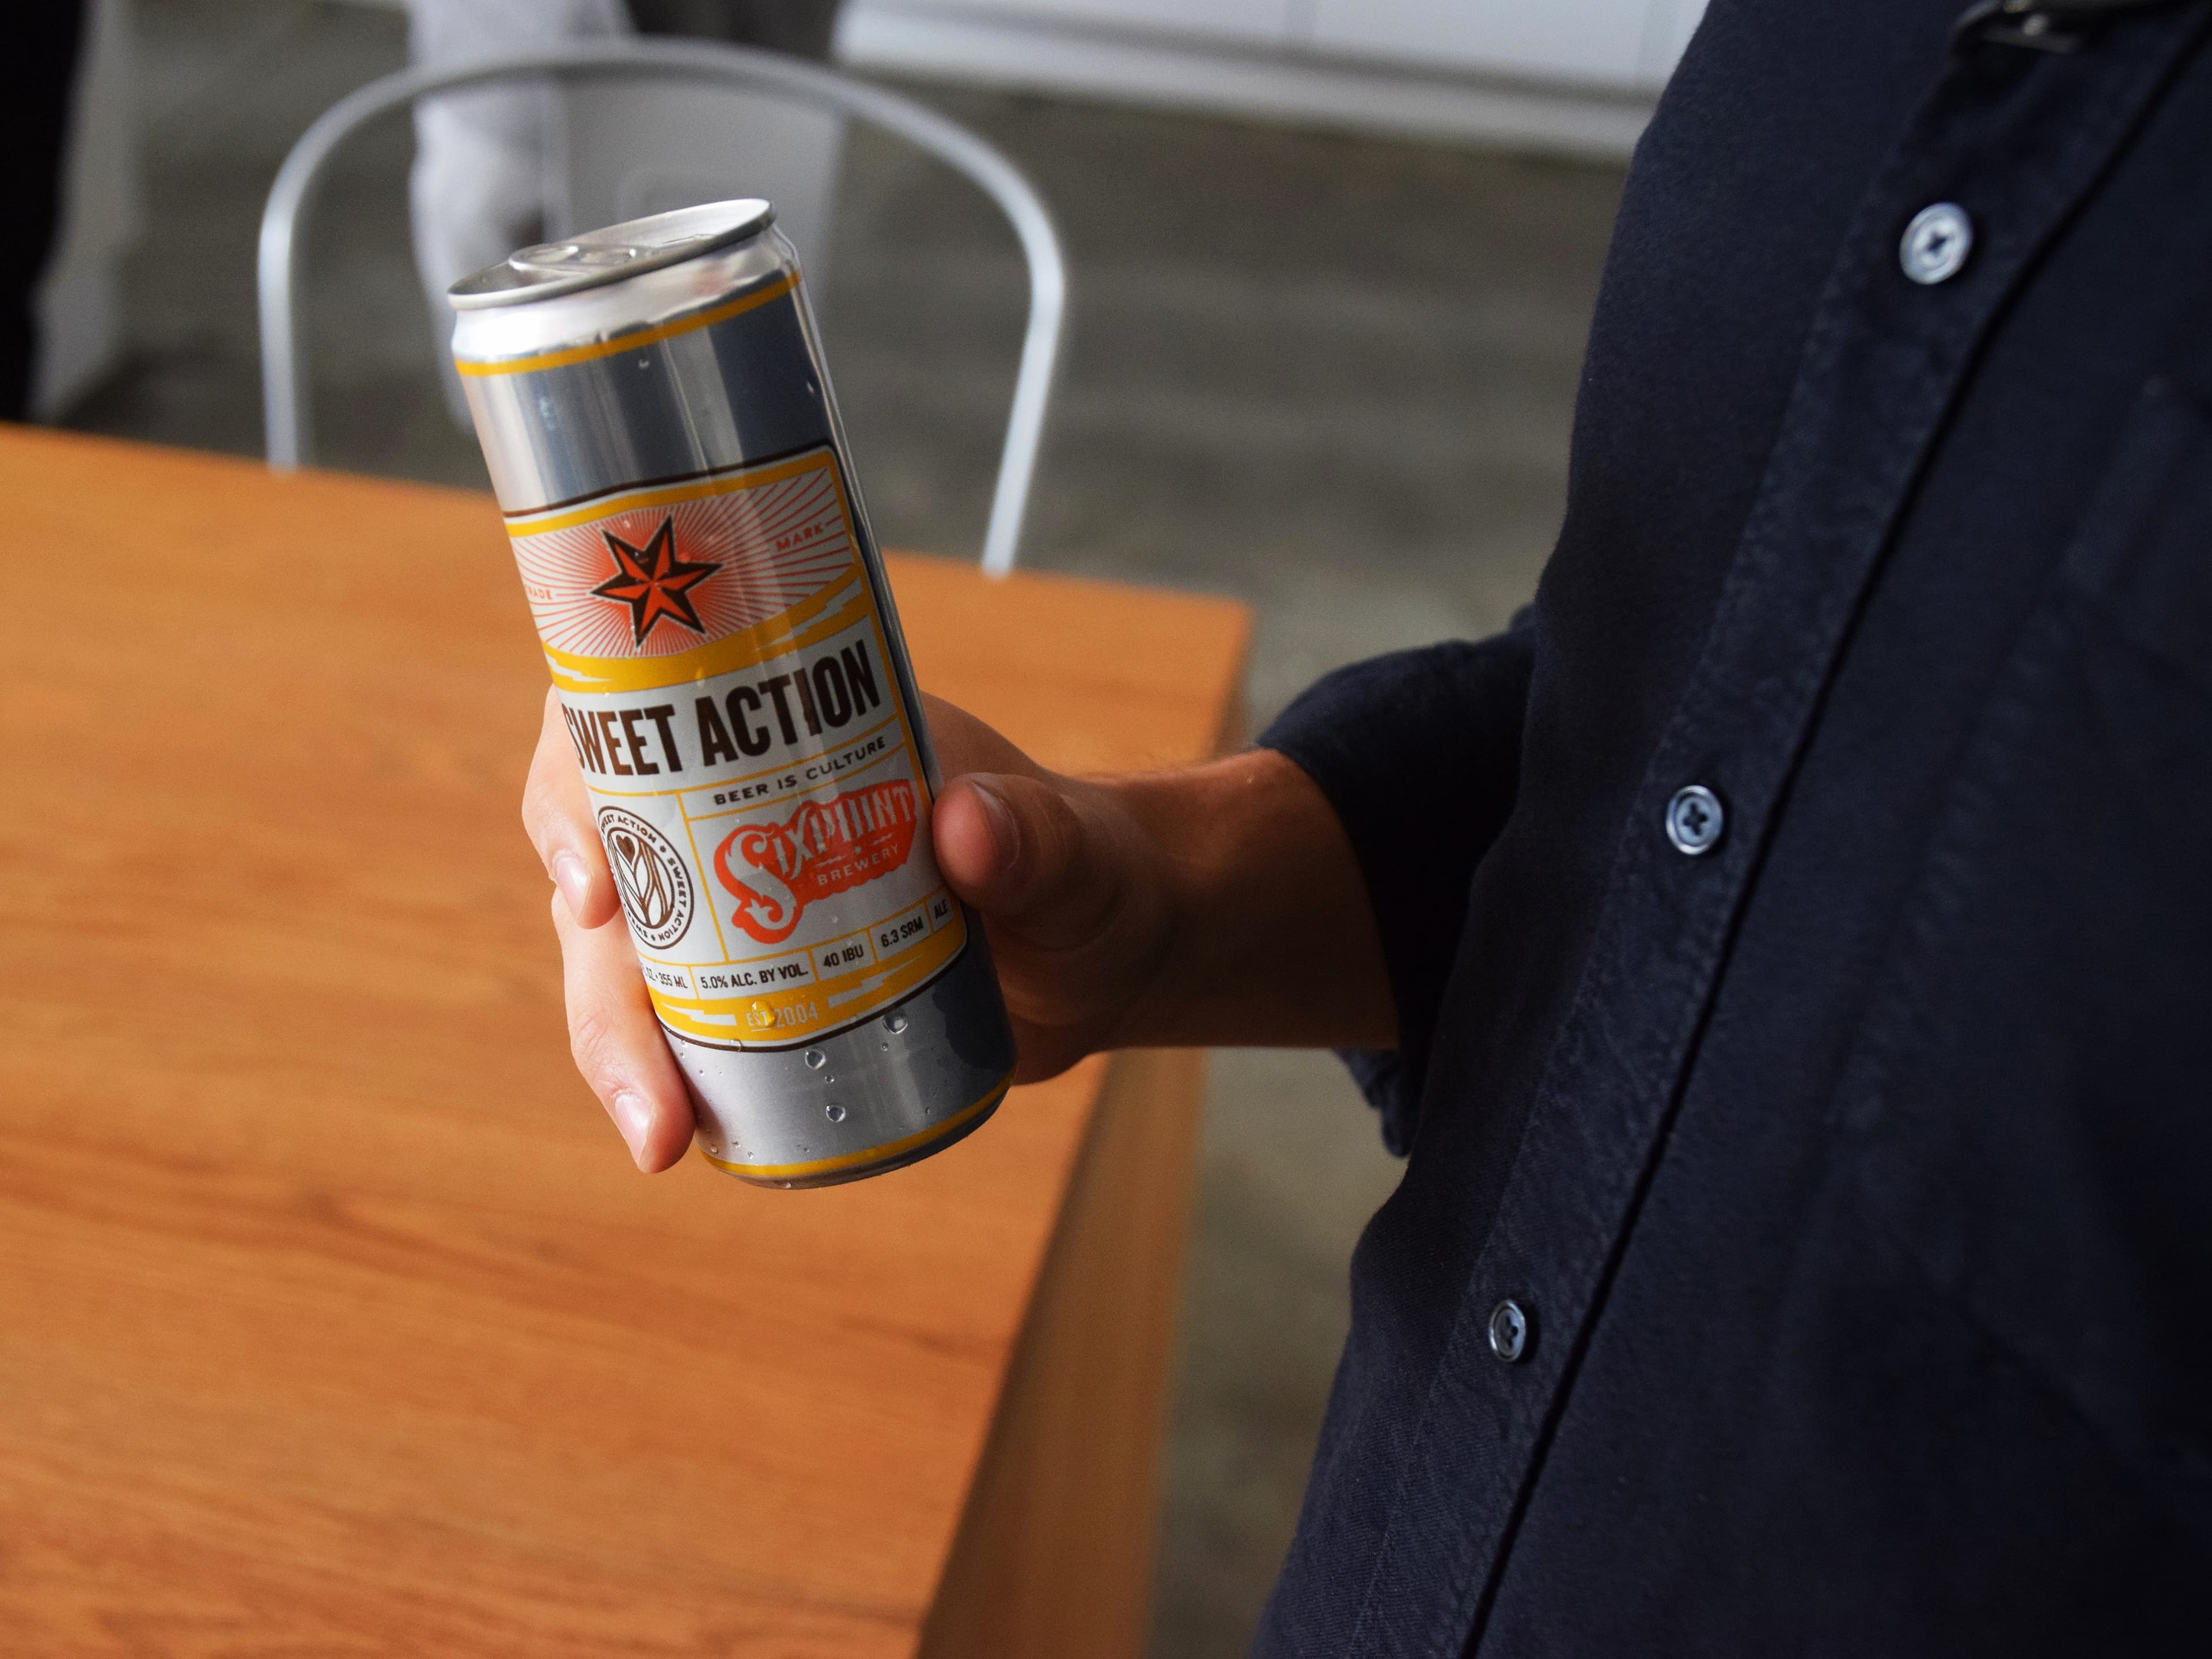 A person is holding a can of Sixpoint Brewery's Sweet Action beer. The can features a star logo and yellow, white, and orange design elements. The person is wearing a dark-colored shirt, and part of a wooden table is visible in the background.